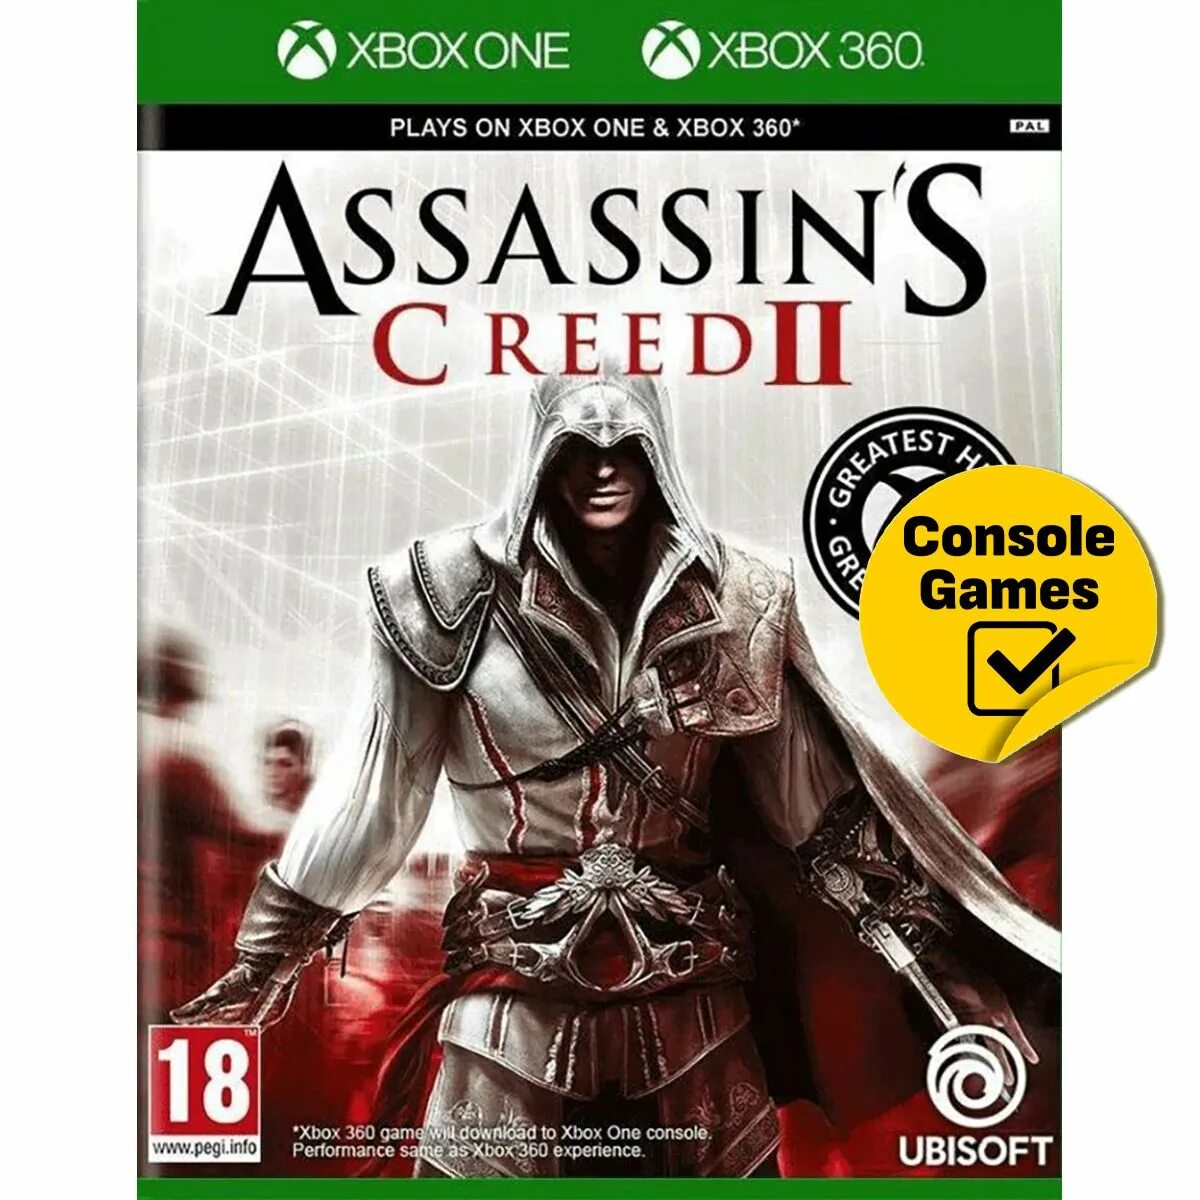 Assassin's creed xbox one. Assassin's Creed Xbox 360 диск. Ассасин Крид 2 на Xbox 360 диск. Ассасин Крид на Xbox 360. Assassins Creed 2 Xbox 360 обложка.